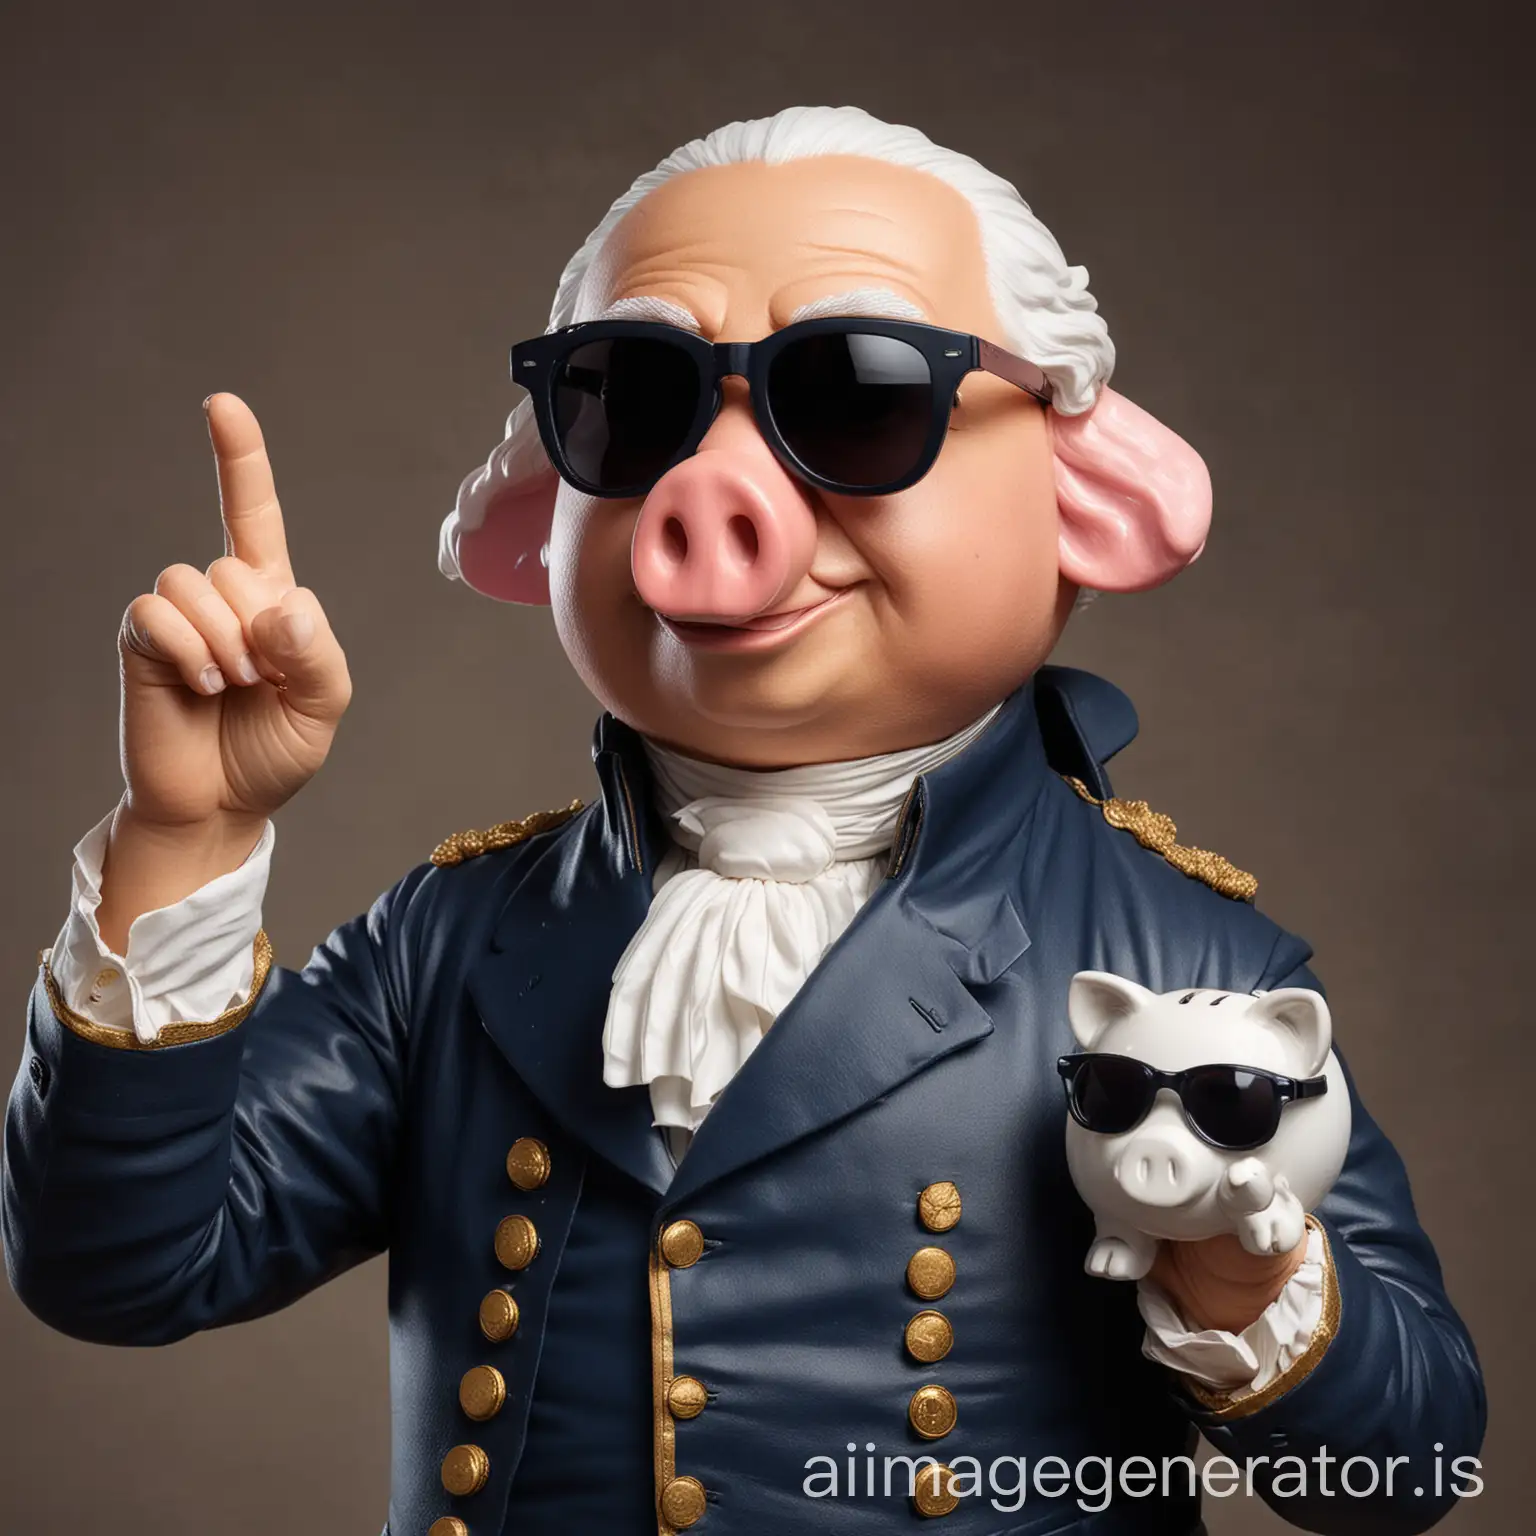 george washington wearing shades and headphone with piggy bank on his hand while pointing his finger